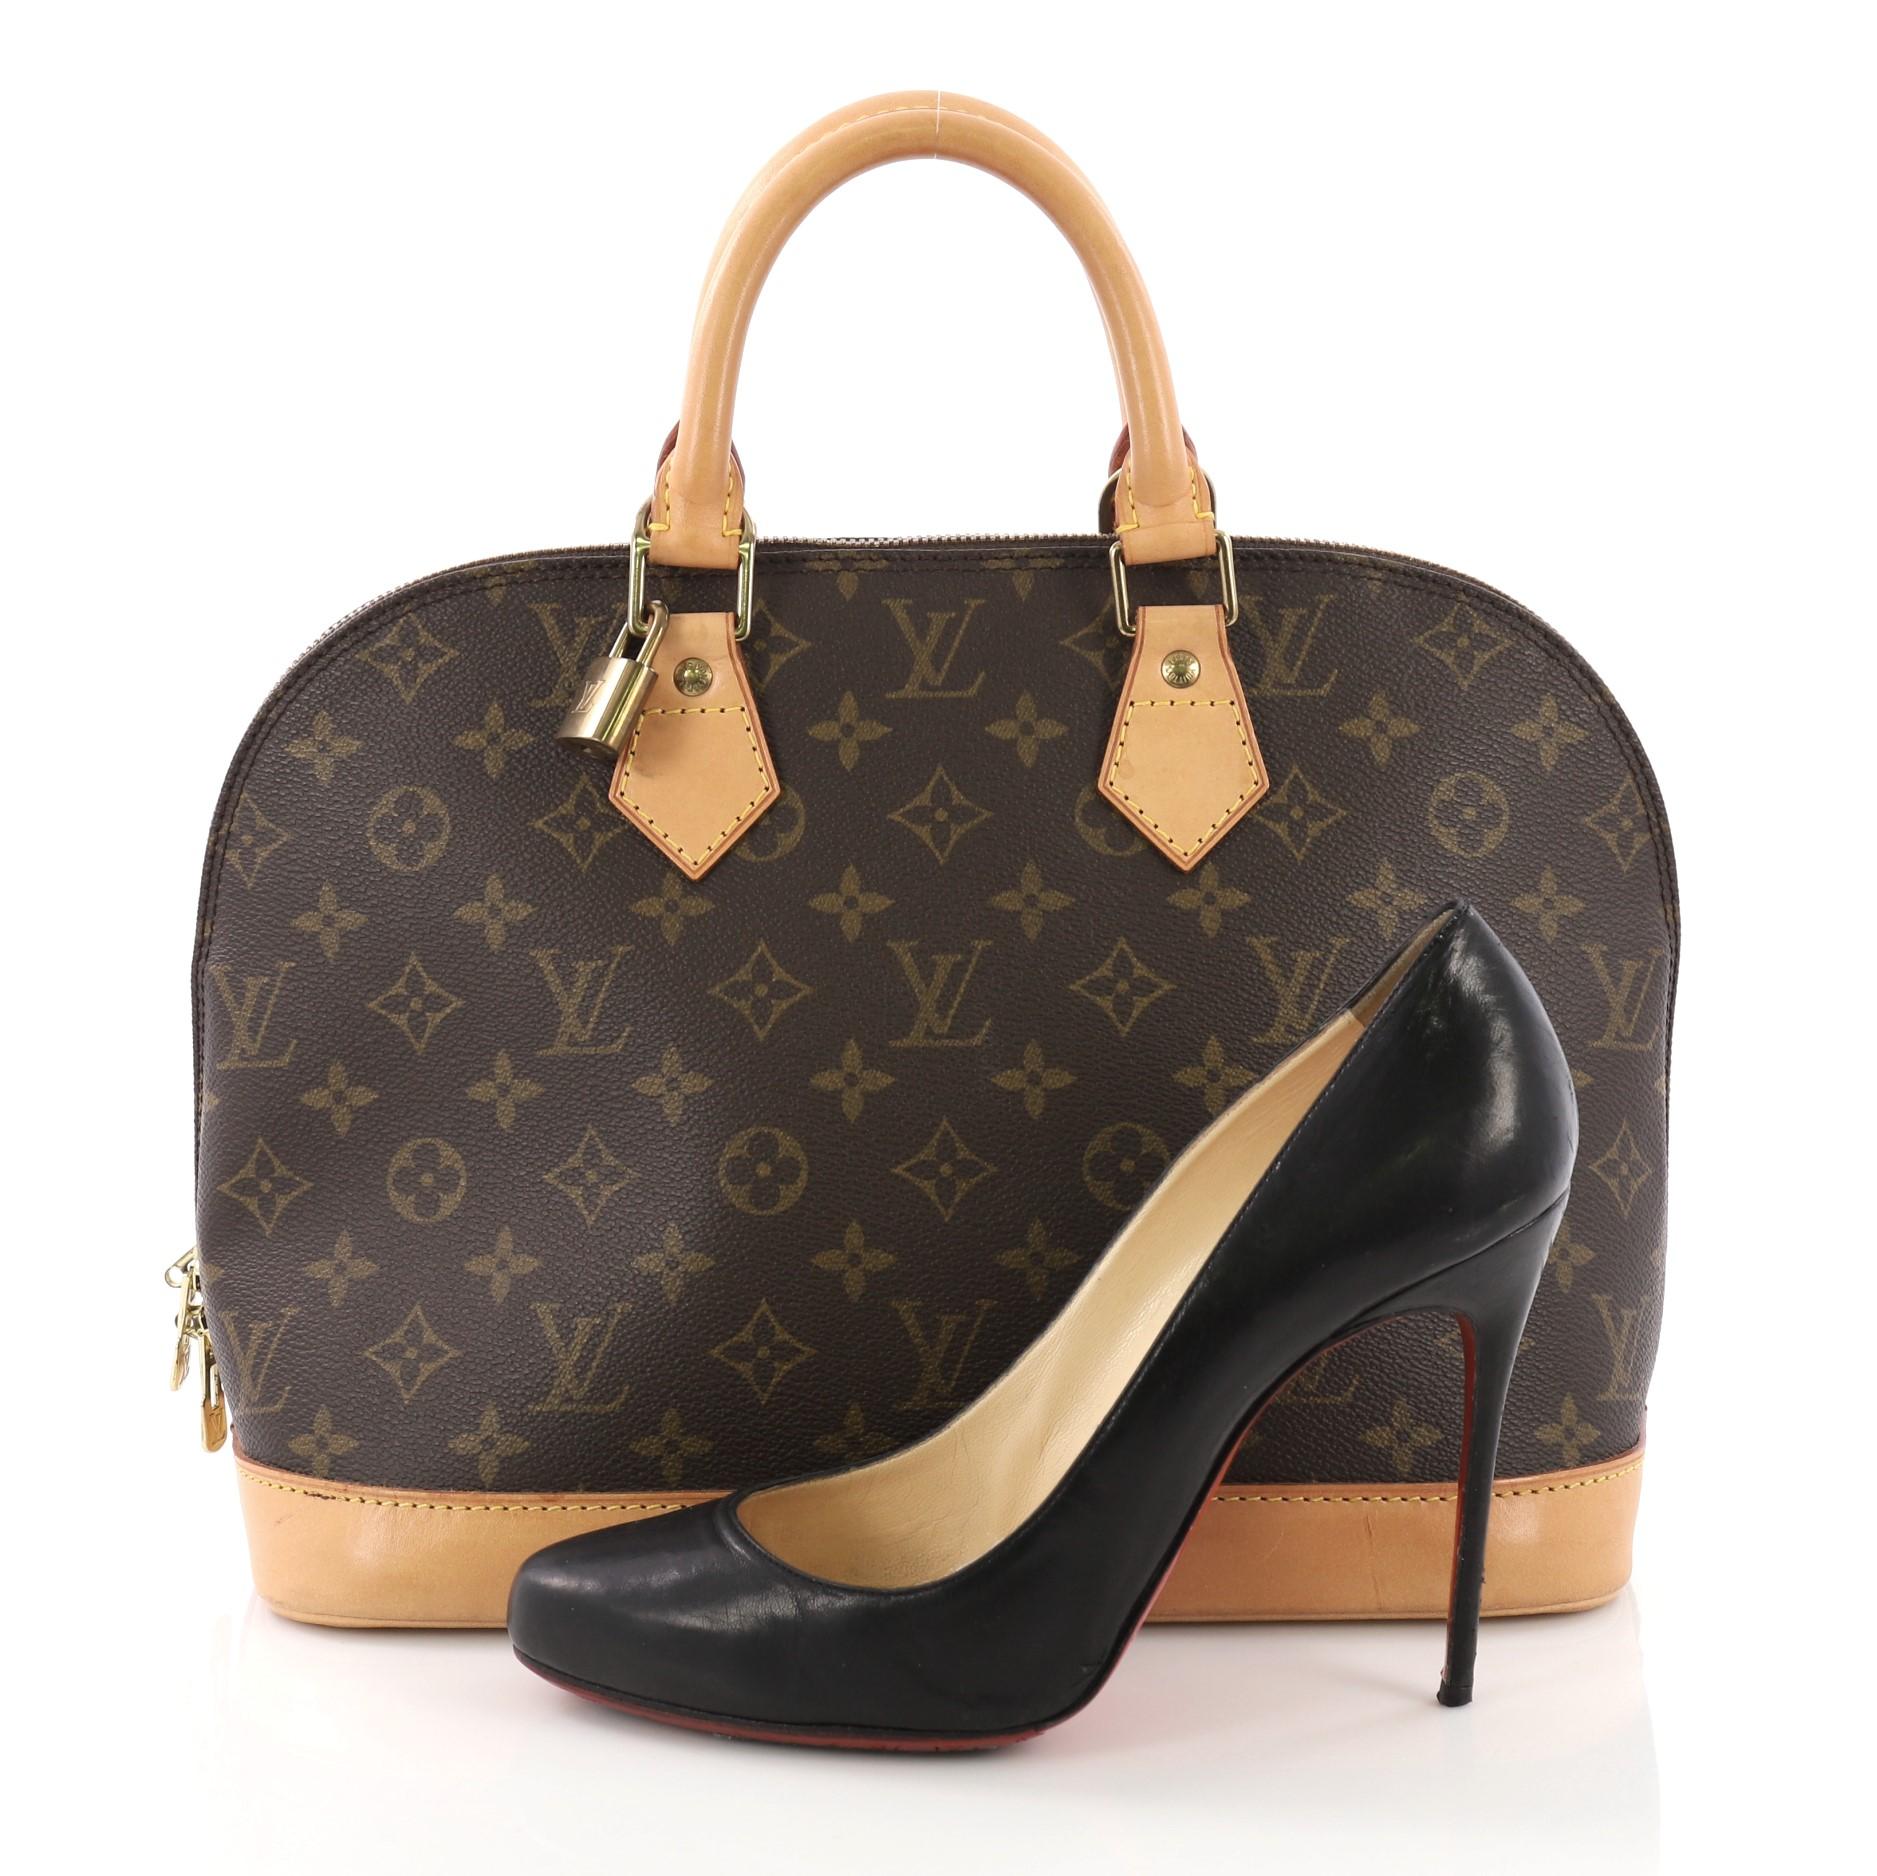 This Louis Vuitton Vintage Alma Handbag Monogram Canvas PM, crafted from brown monogram coated canvas, features dual rolled handles, leather trims, and gold-tone hardware. Its two-way zip closure opens to a brown fabric interior with slip pockets.